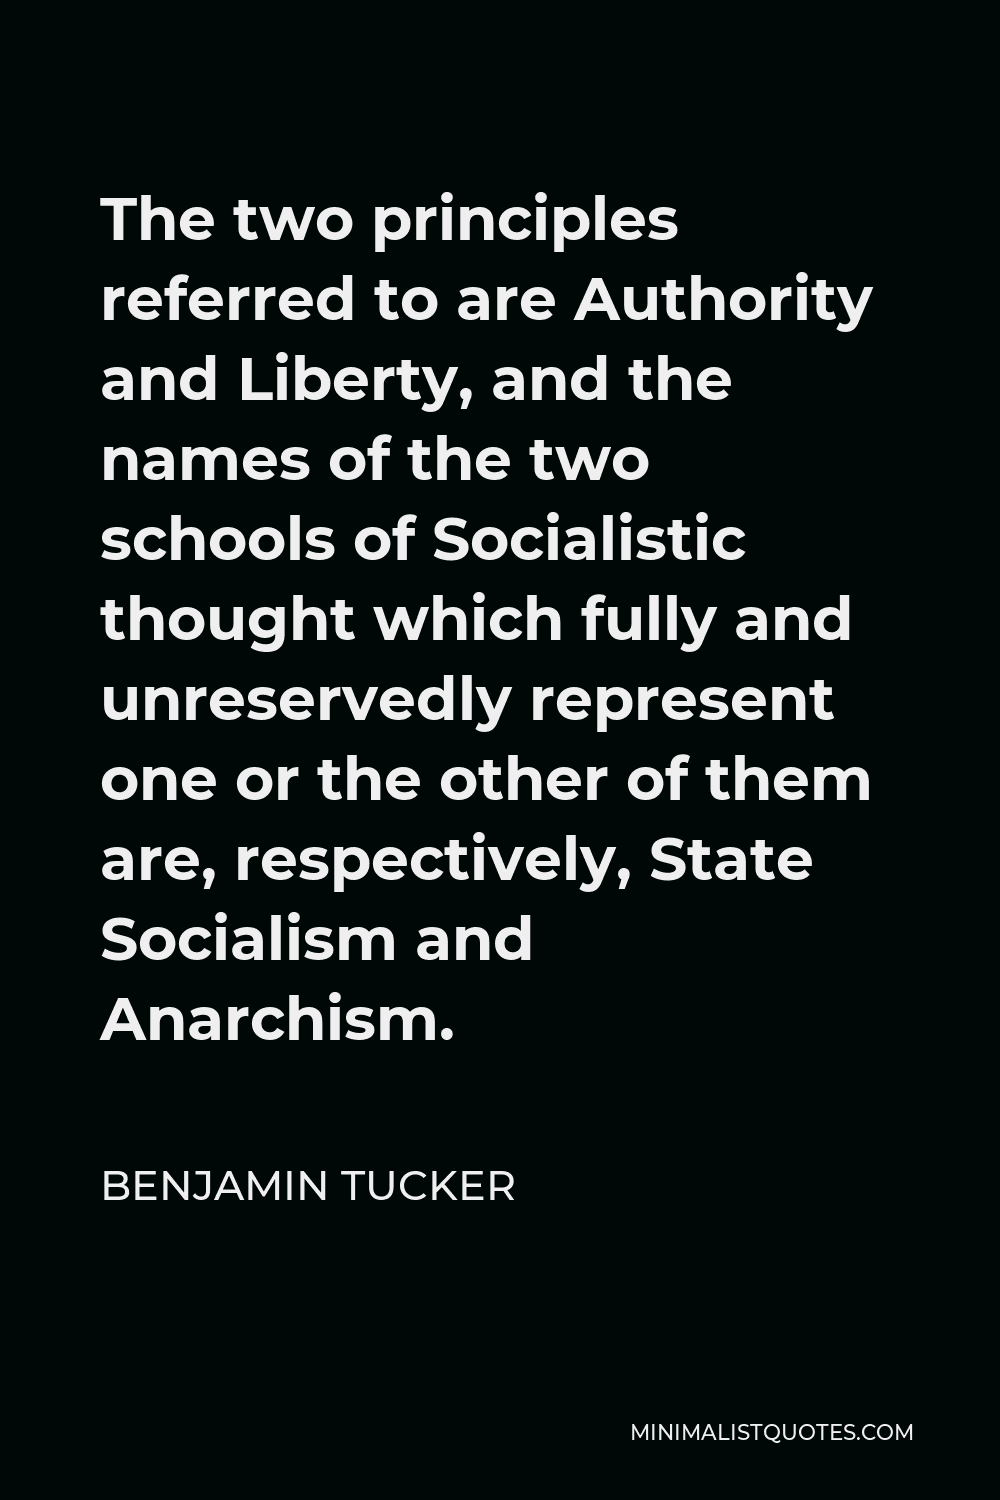 Benjamin Tucker Quote - The two principles referred to are Authority and Liberty, and the names of the two schools of Socialistic thought which fully and unreservedly represent one or the other of them are, respectively, State Socialism and Anarchism.